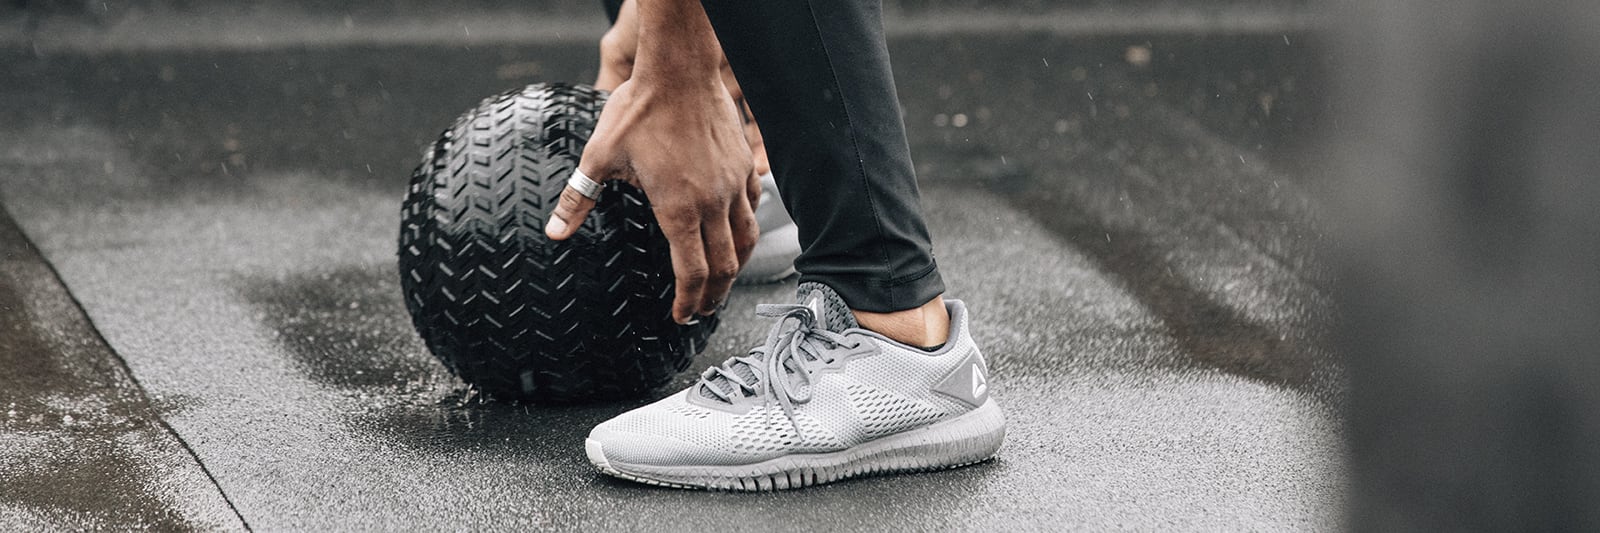 best training shoes for lifting